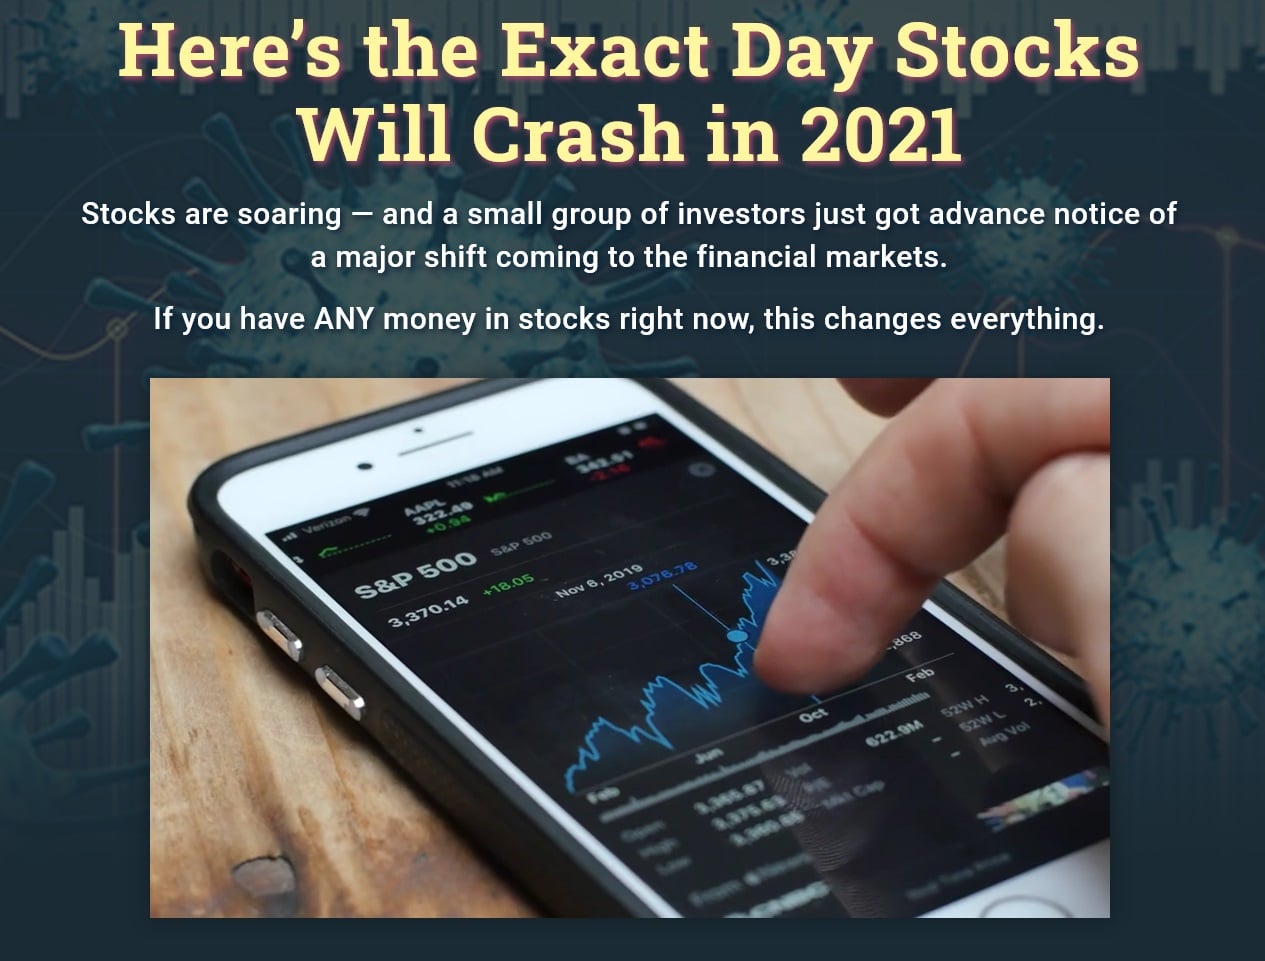 Trade360 Review - Here's The Exact Day Stocks Will Crash in 2021